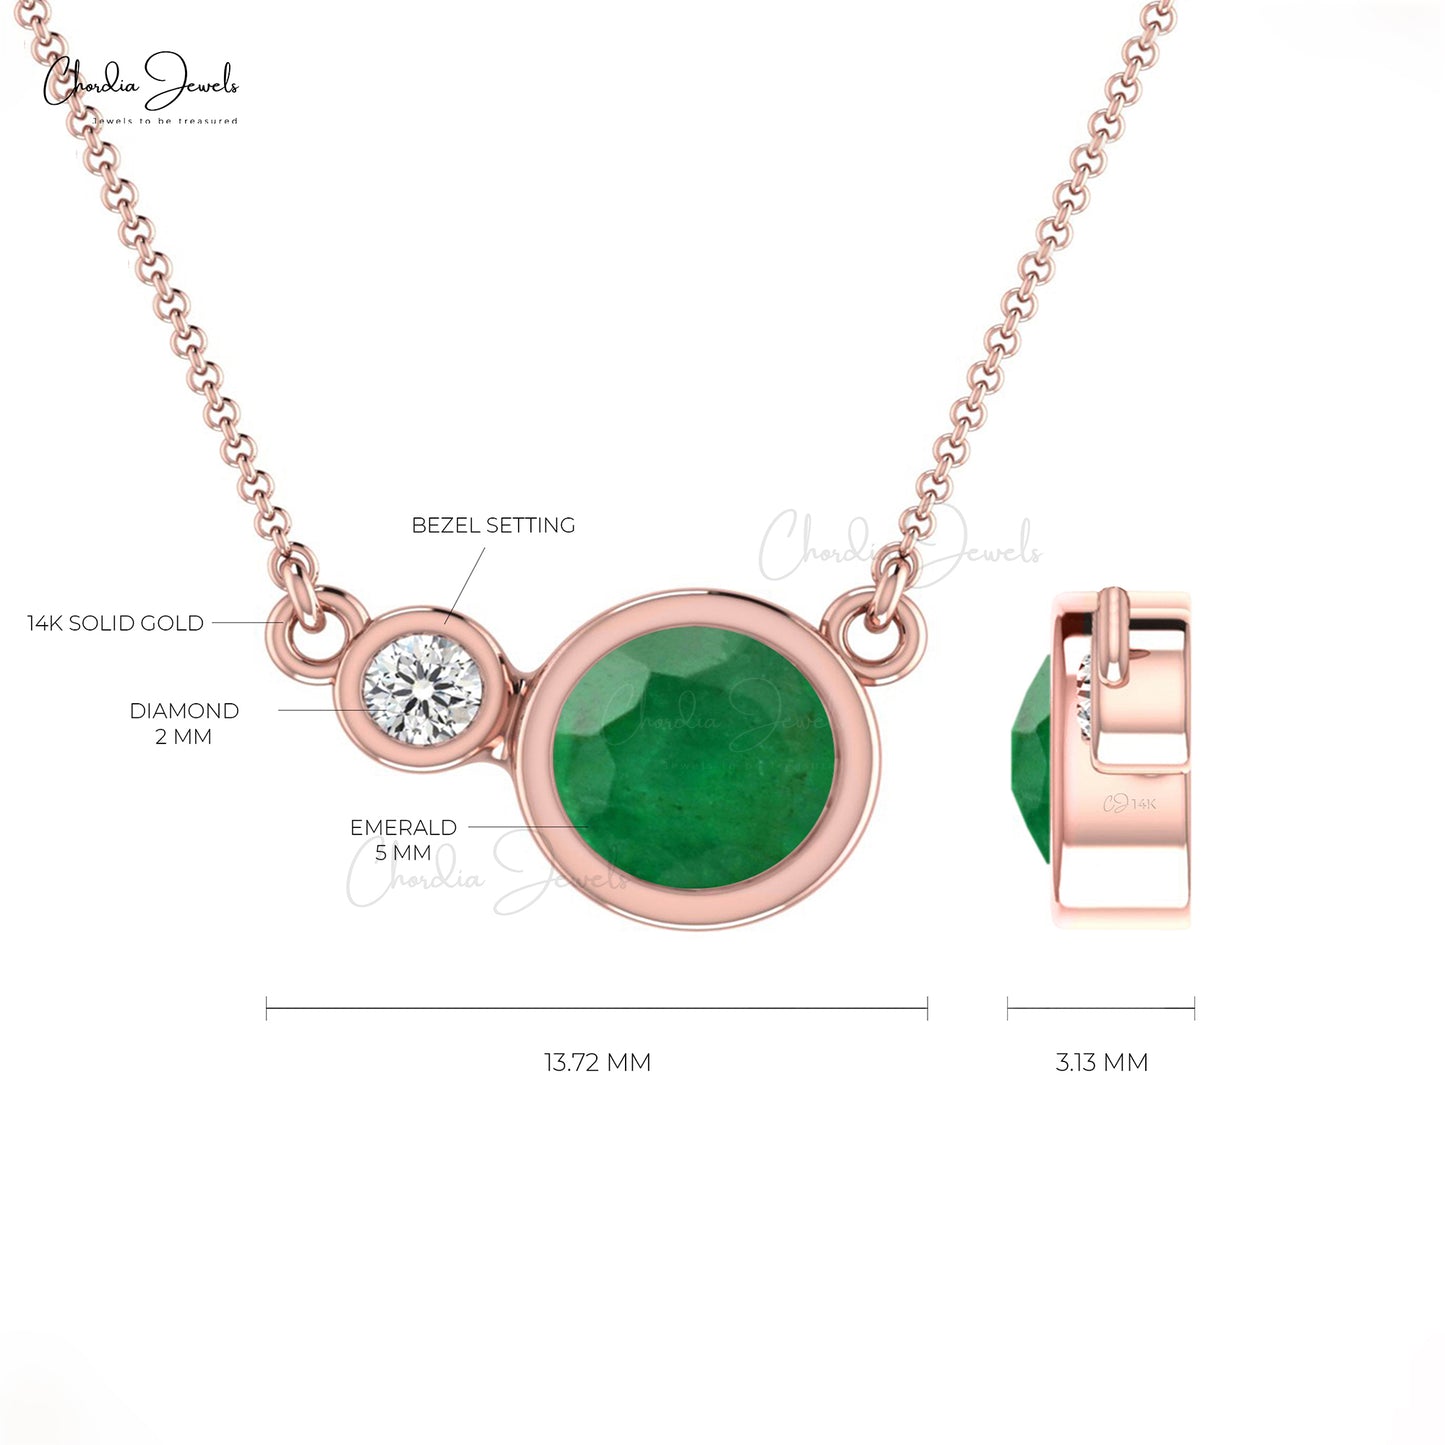 Antique Bezel Set Diamond Necklace Pendant With Spring Round Shape Natural Emerald Gemstone Pendant in Pure 14k Gold Gift For Wife